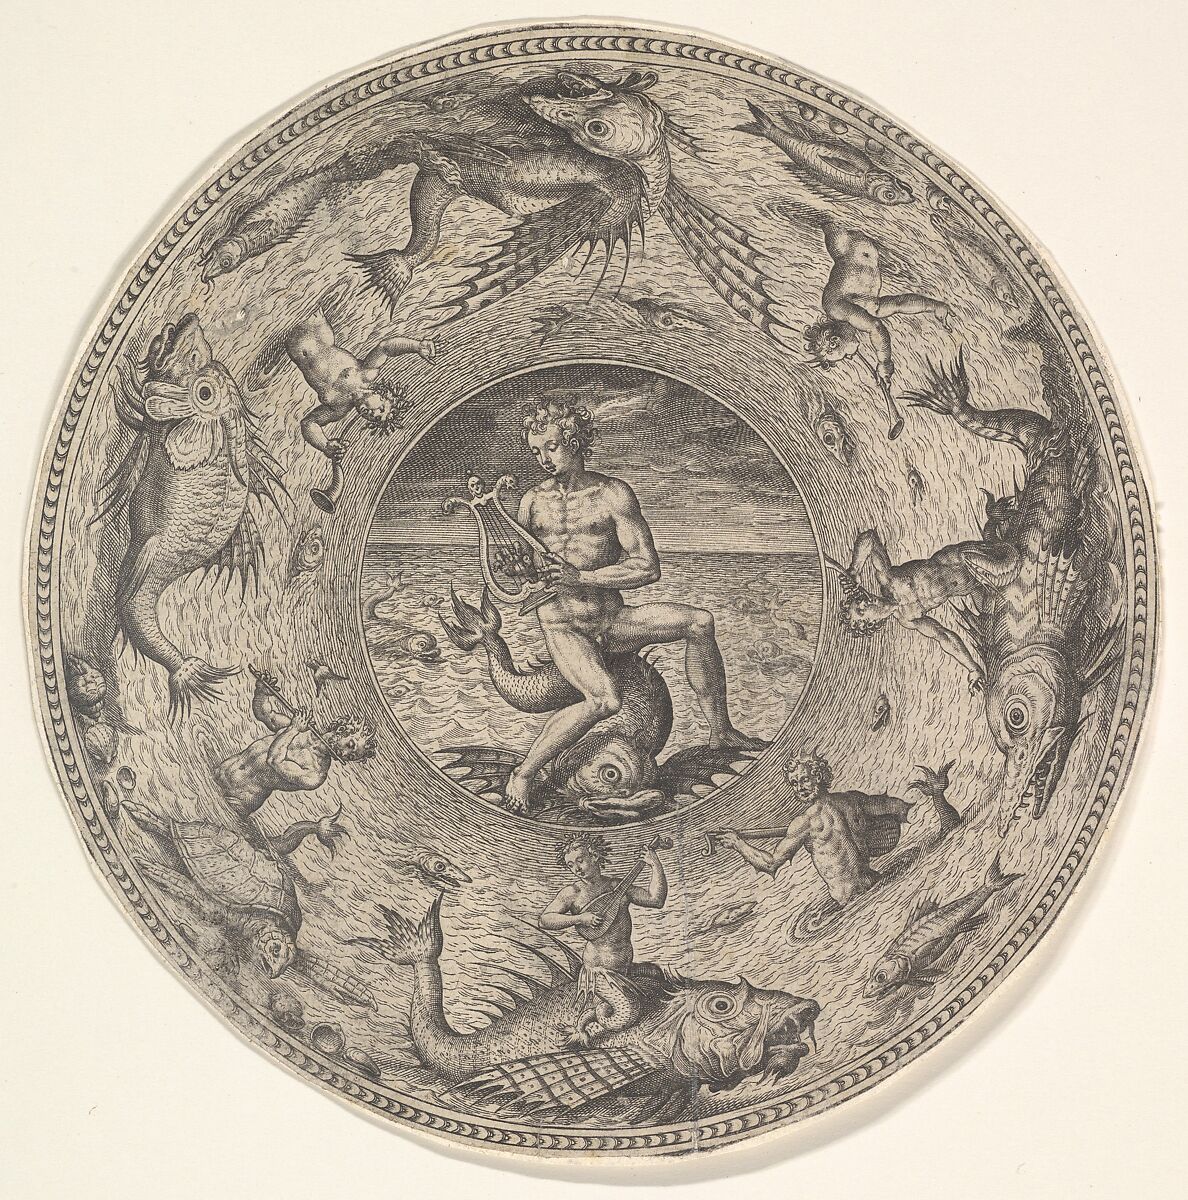 Arion on a Dolphin surrounded by a Border decorated with Sea Creatures, from a Set of Circular Designs with Sea Gods, Adriaen Collaert (Netherlandish, Antwerp ca. 1560–1618 Antwerp), Engraving 